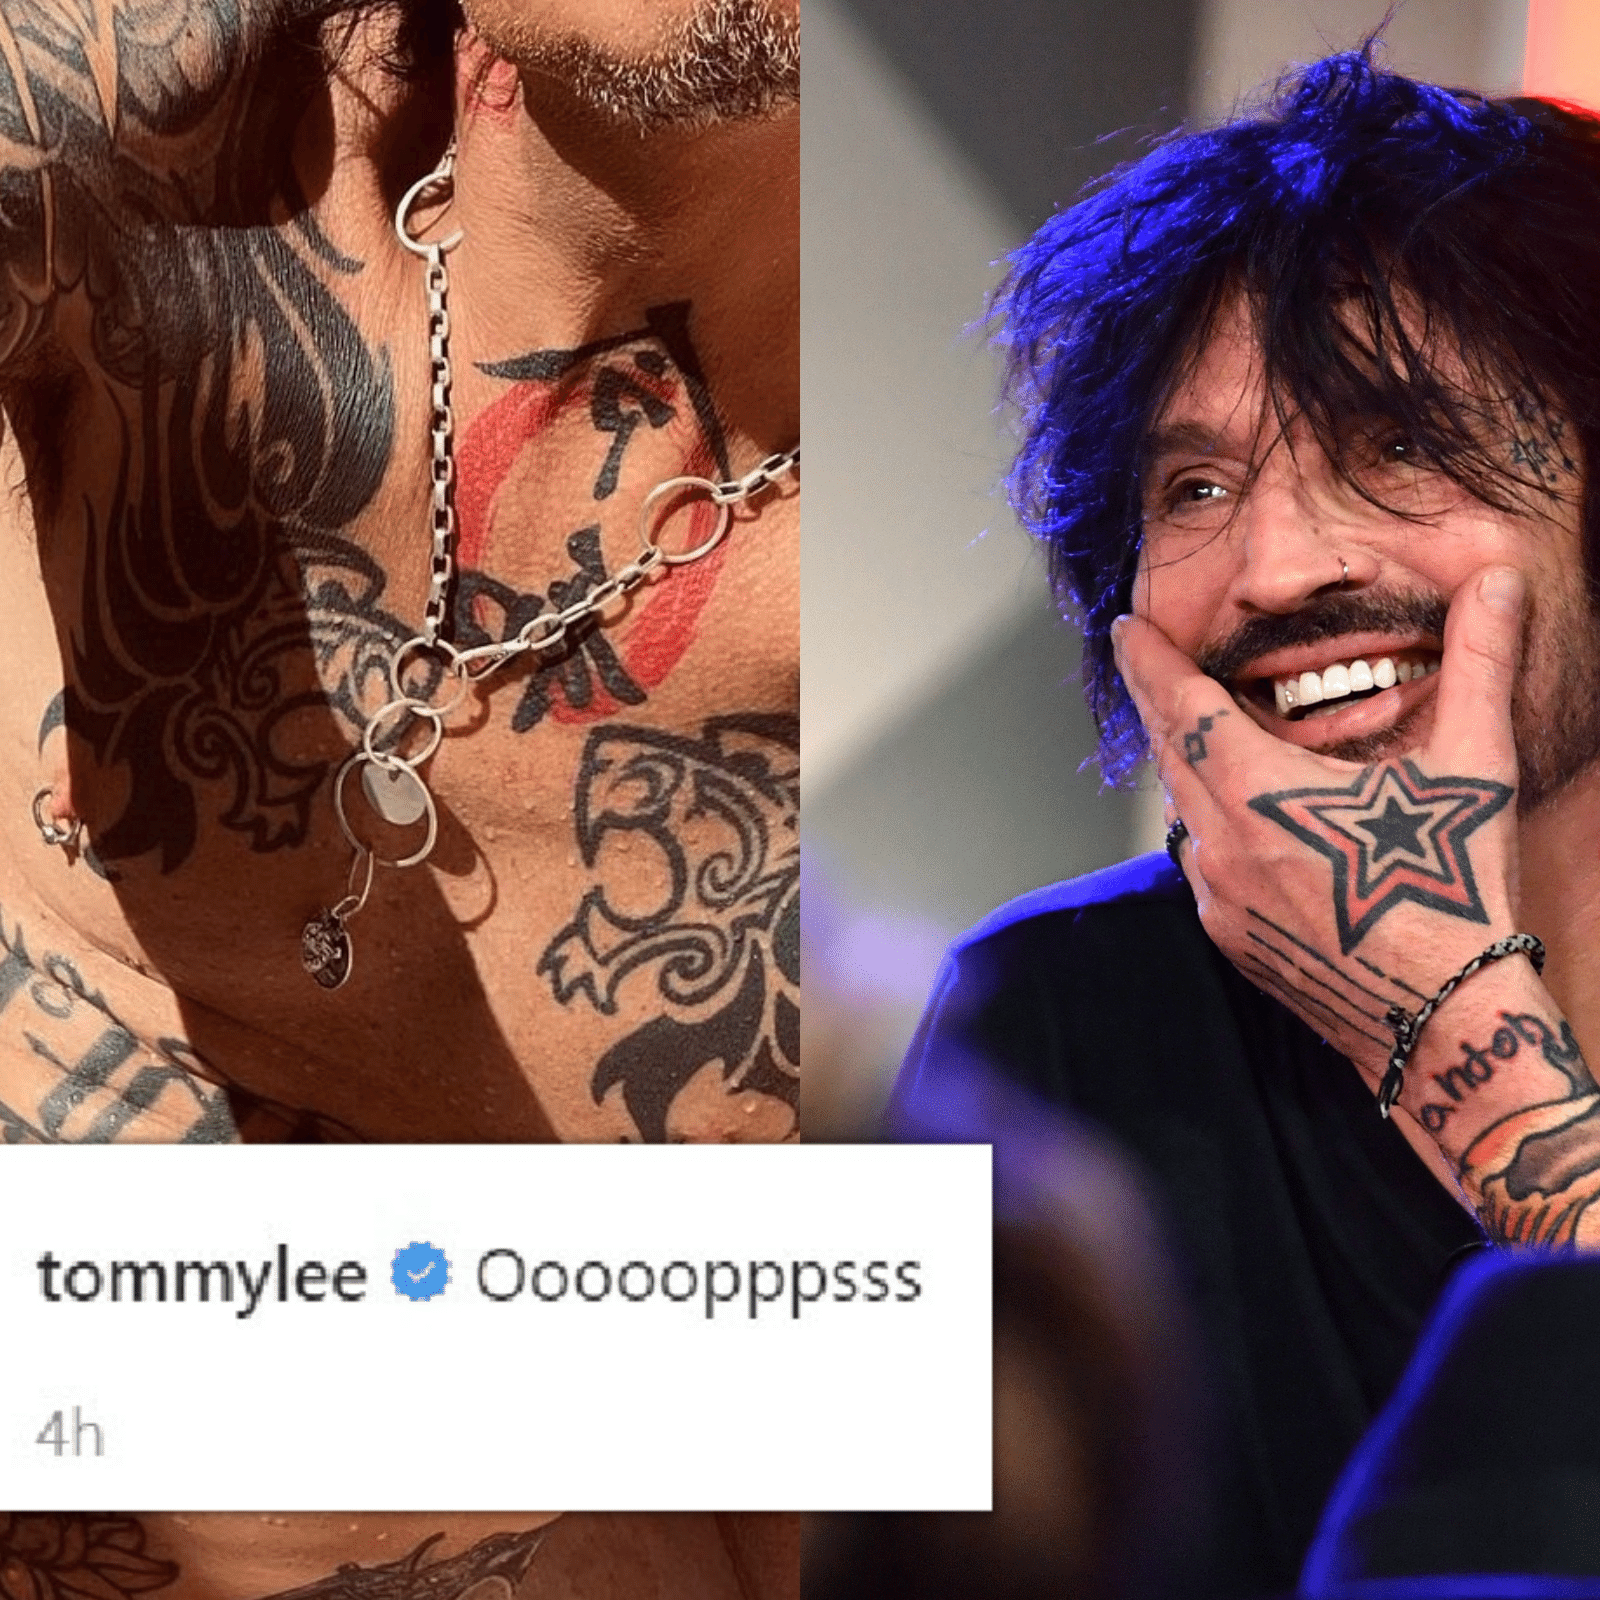 Users Claim Instagram Fine With Nude Tommy Lee Pic But Censor Female Bodies